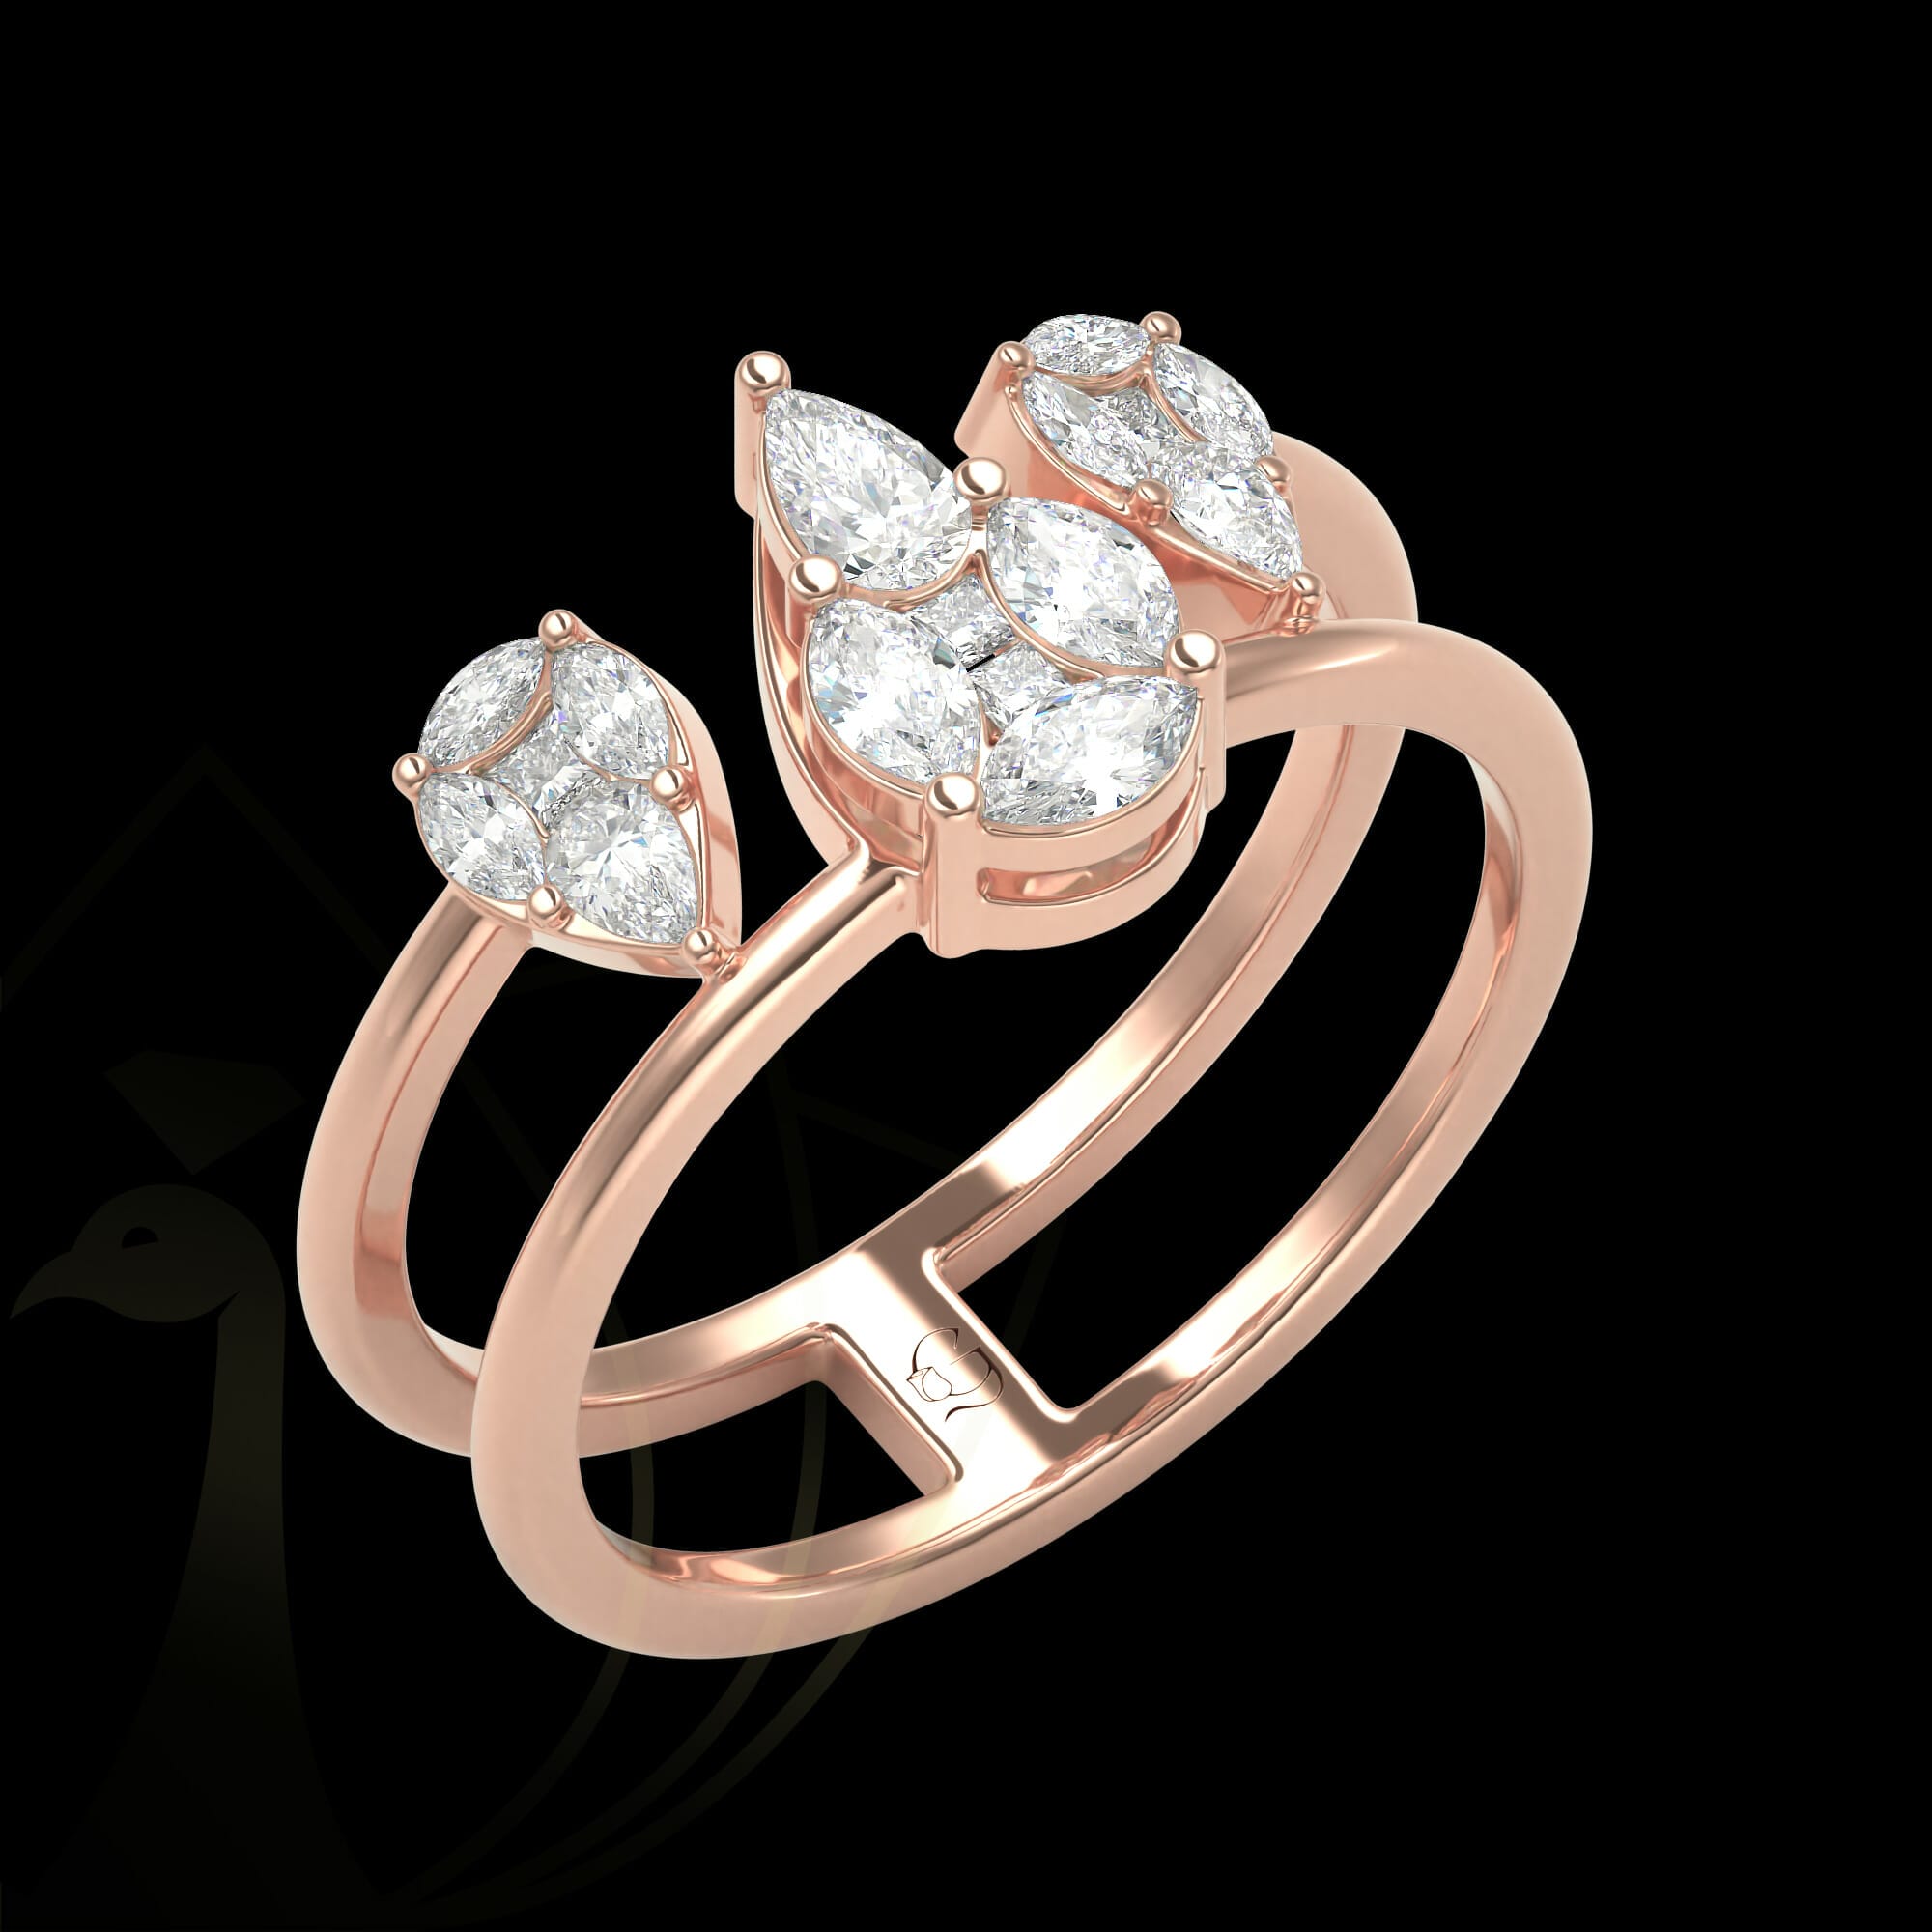 The glorious dazzle marquise and pear diamond ring in rose gold.